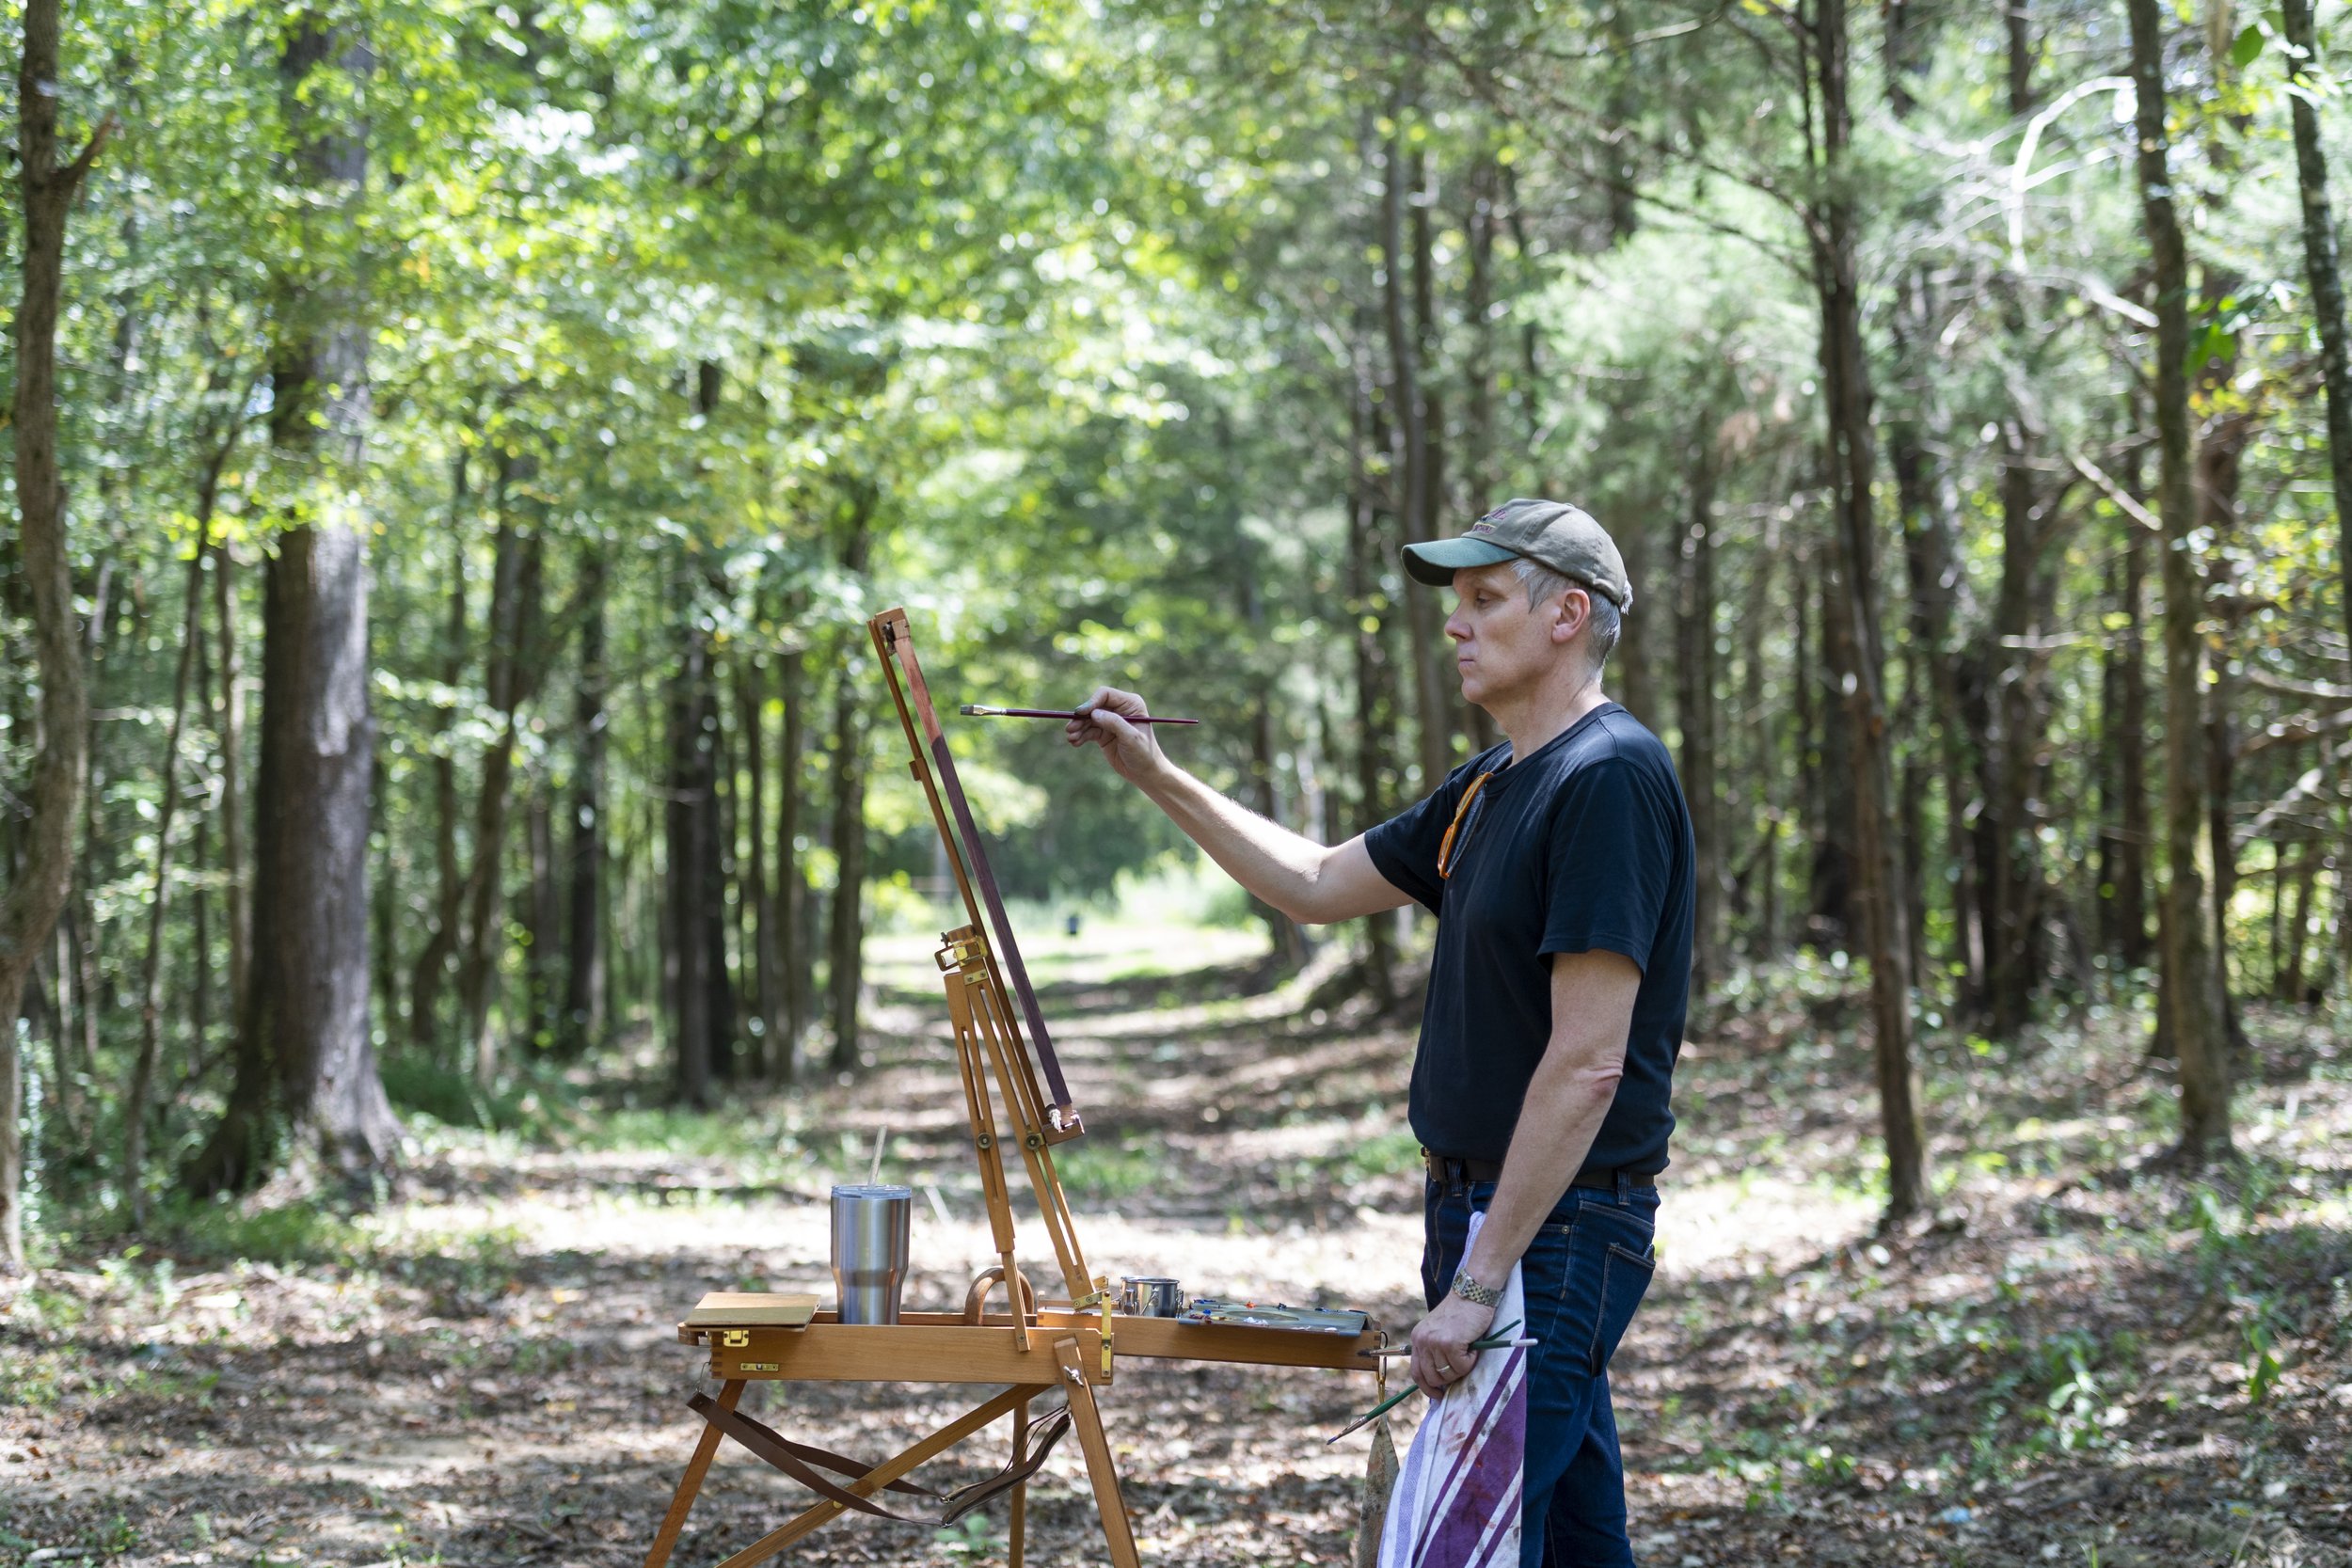  Nine Mississippi artists participate in Plein Air Painting Competition at Greenfield Farm on Sept. 17, 2023. Thomas Coon, a visual fine artist, specializing in equine and canine portraiture who teaches at the University of Mississippi. Photo by Srij